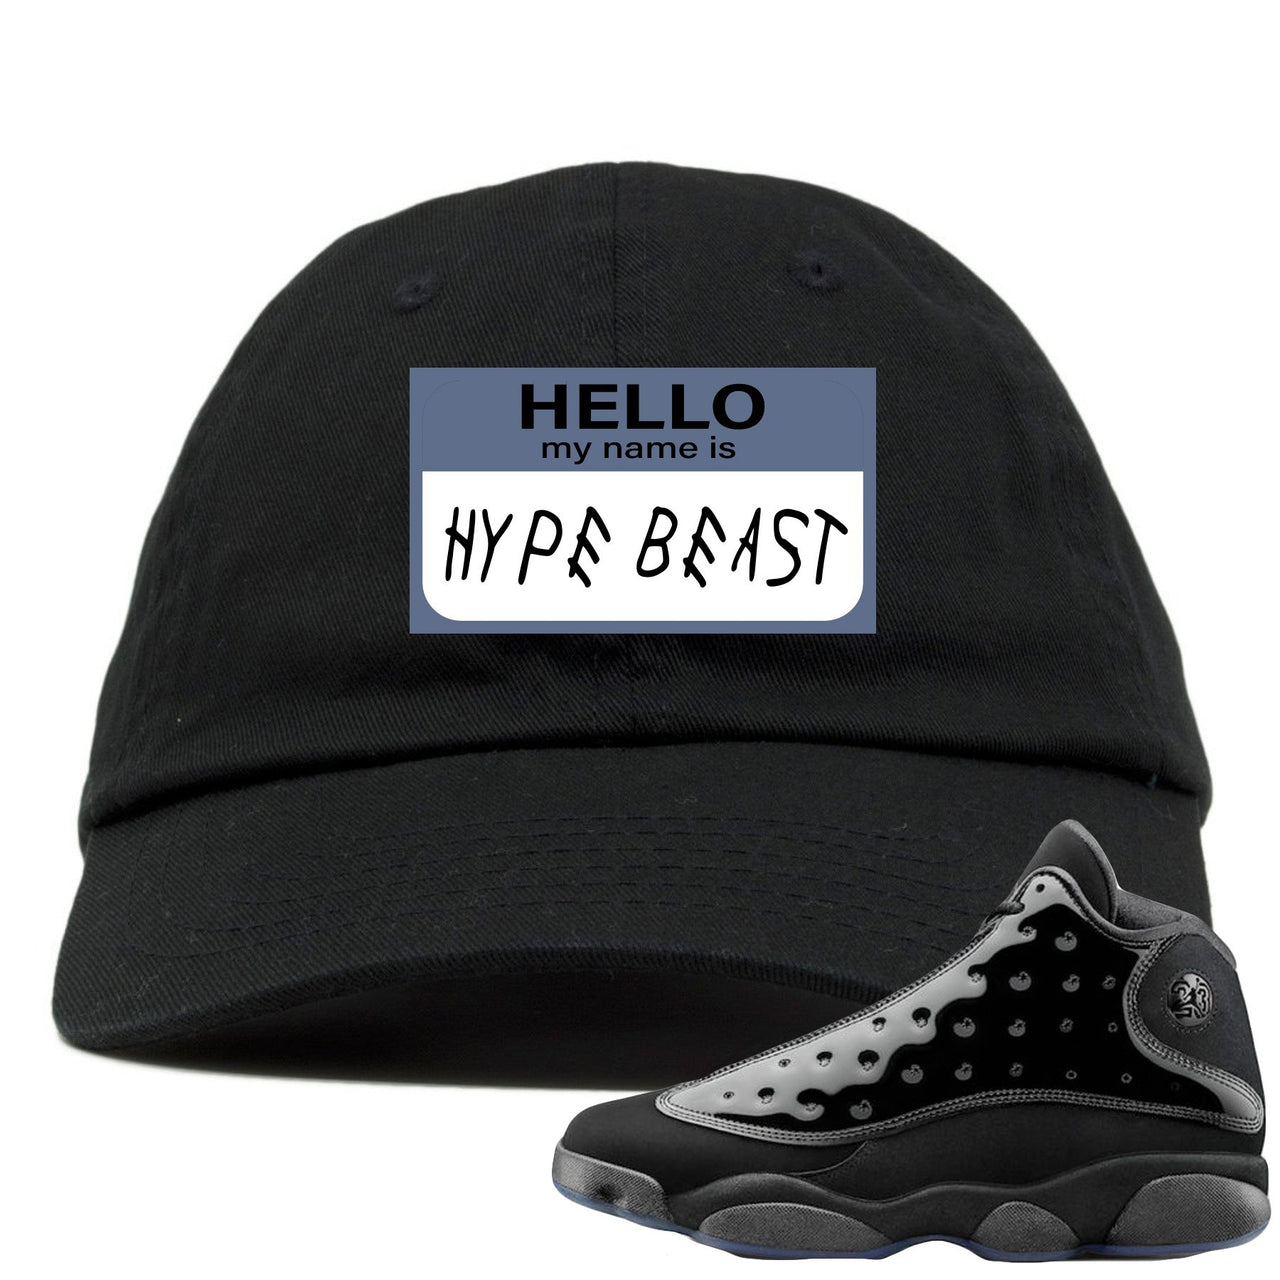 Cap and Gown 13s Dad Hat | Hello My Name is Hype Beast Woe Style, Black